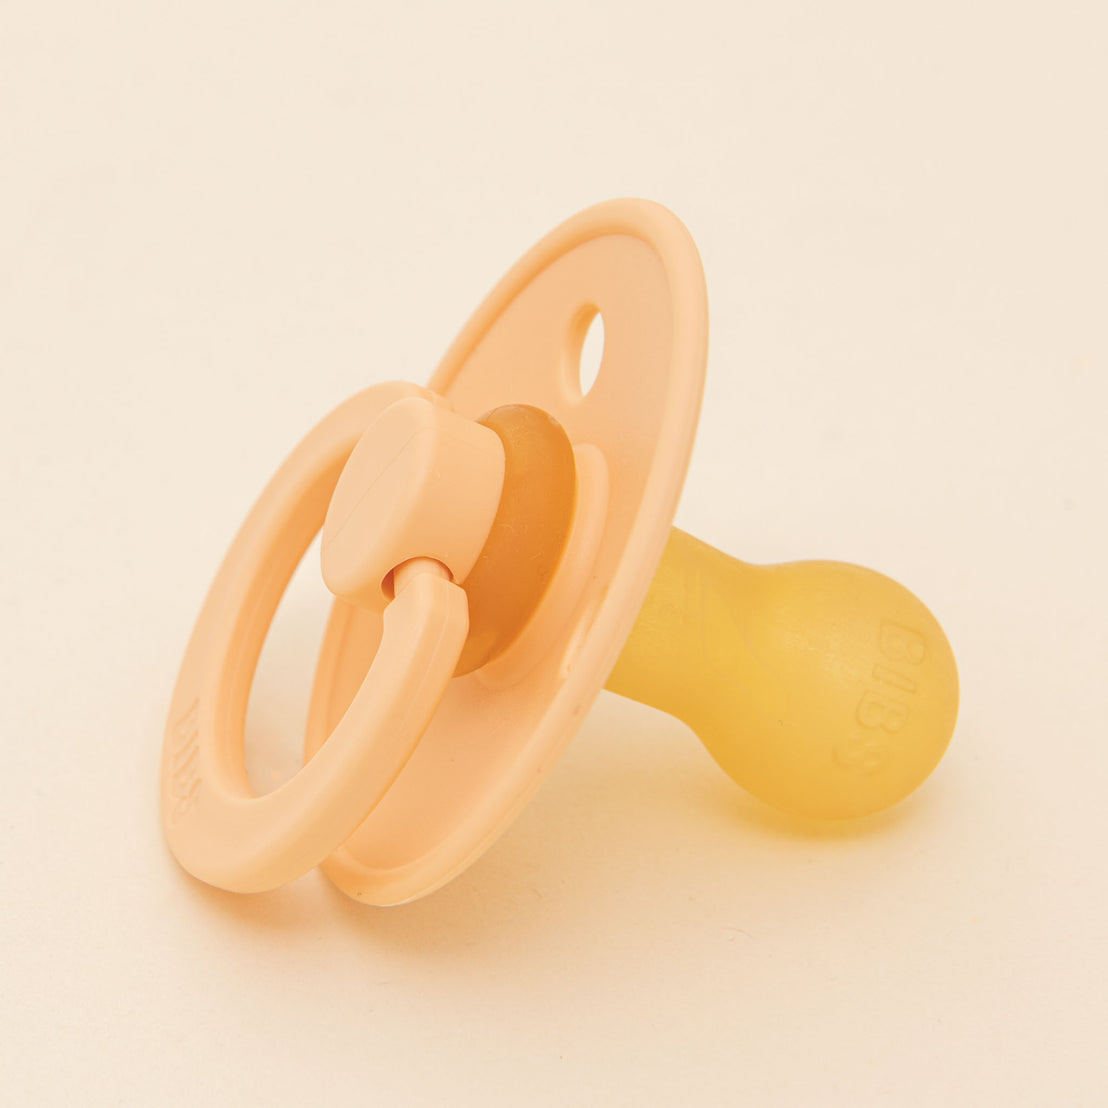 A Bibs Pacifier in Peach Sunset-colored natural rubber baby pacifier on a light beige background. The pacifier features a textured handle and a smooth, rounded shield.